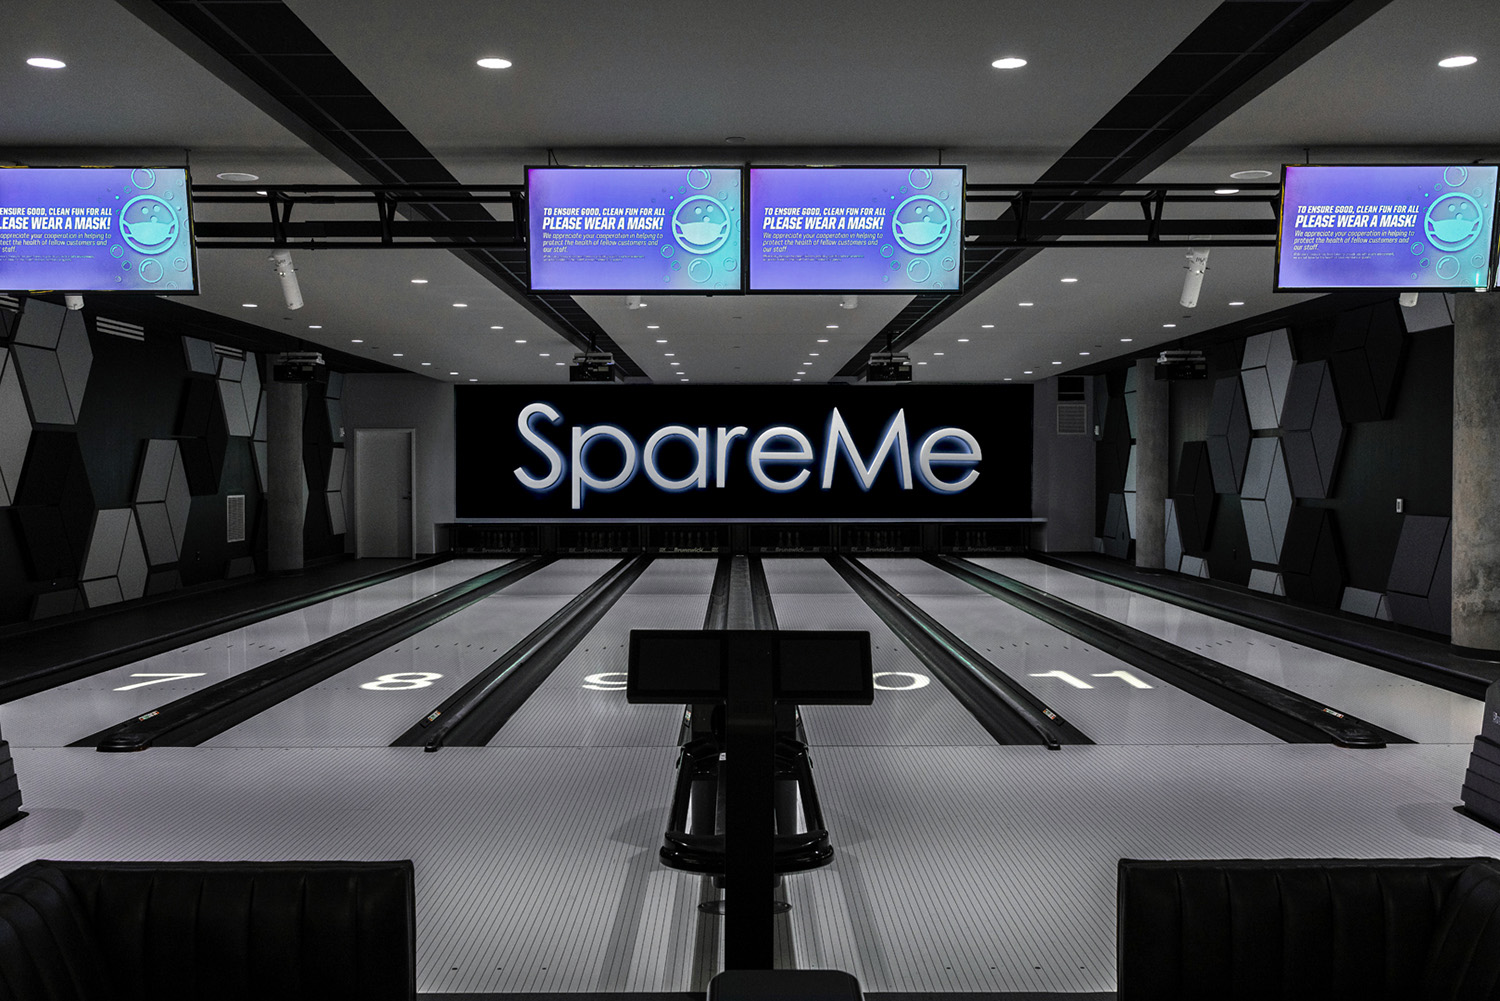 The two SpareMe bowling alleys within the Hotel Chauncey provide fun and entertainment for the surrounding community and is a popular local hangout for the University of Iowa students and staff.